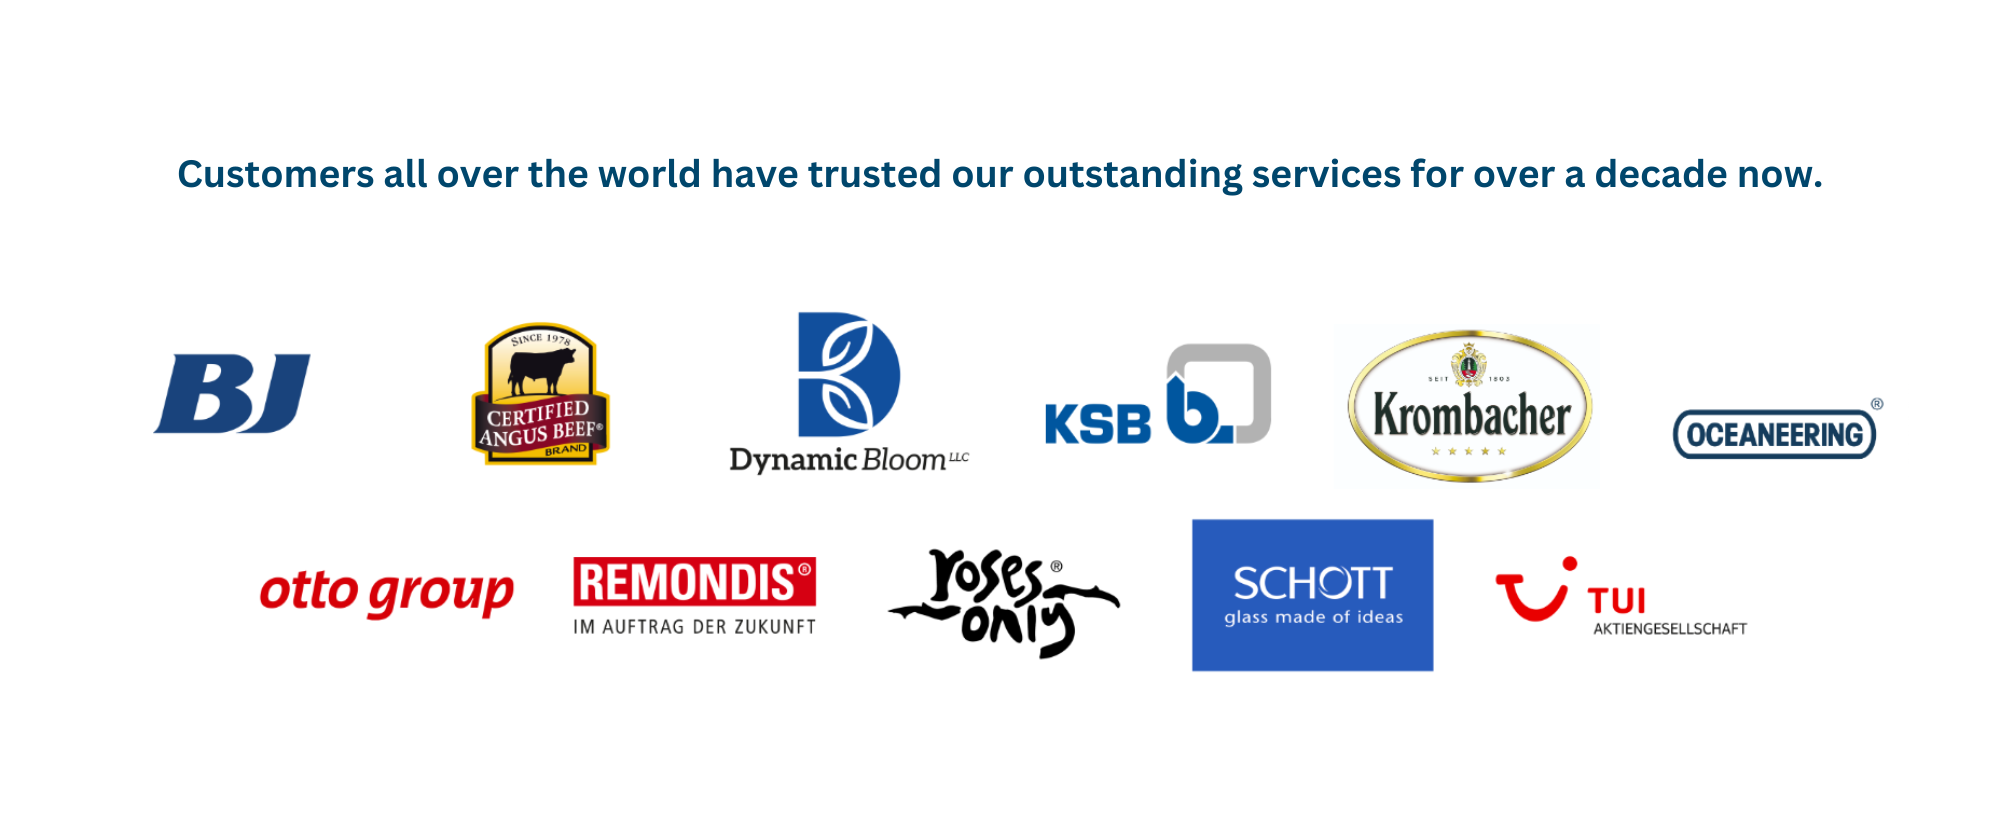 We have protected our customers brand assets for over a decade now. 